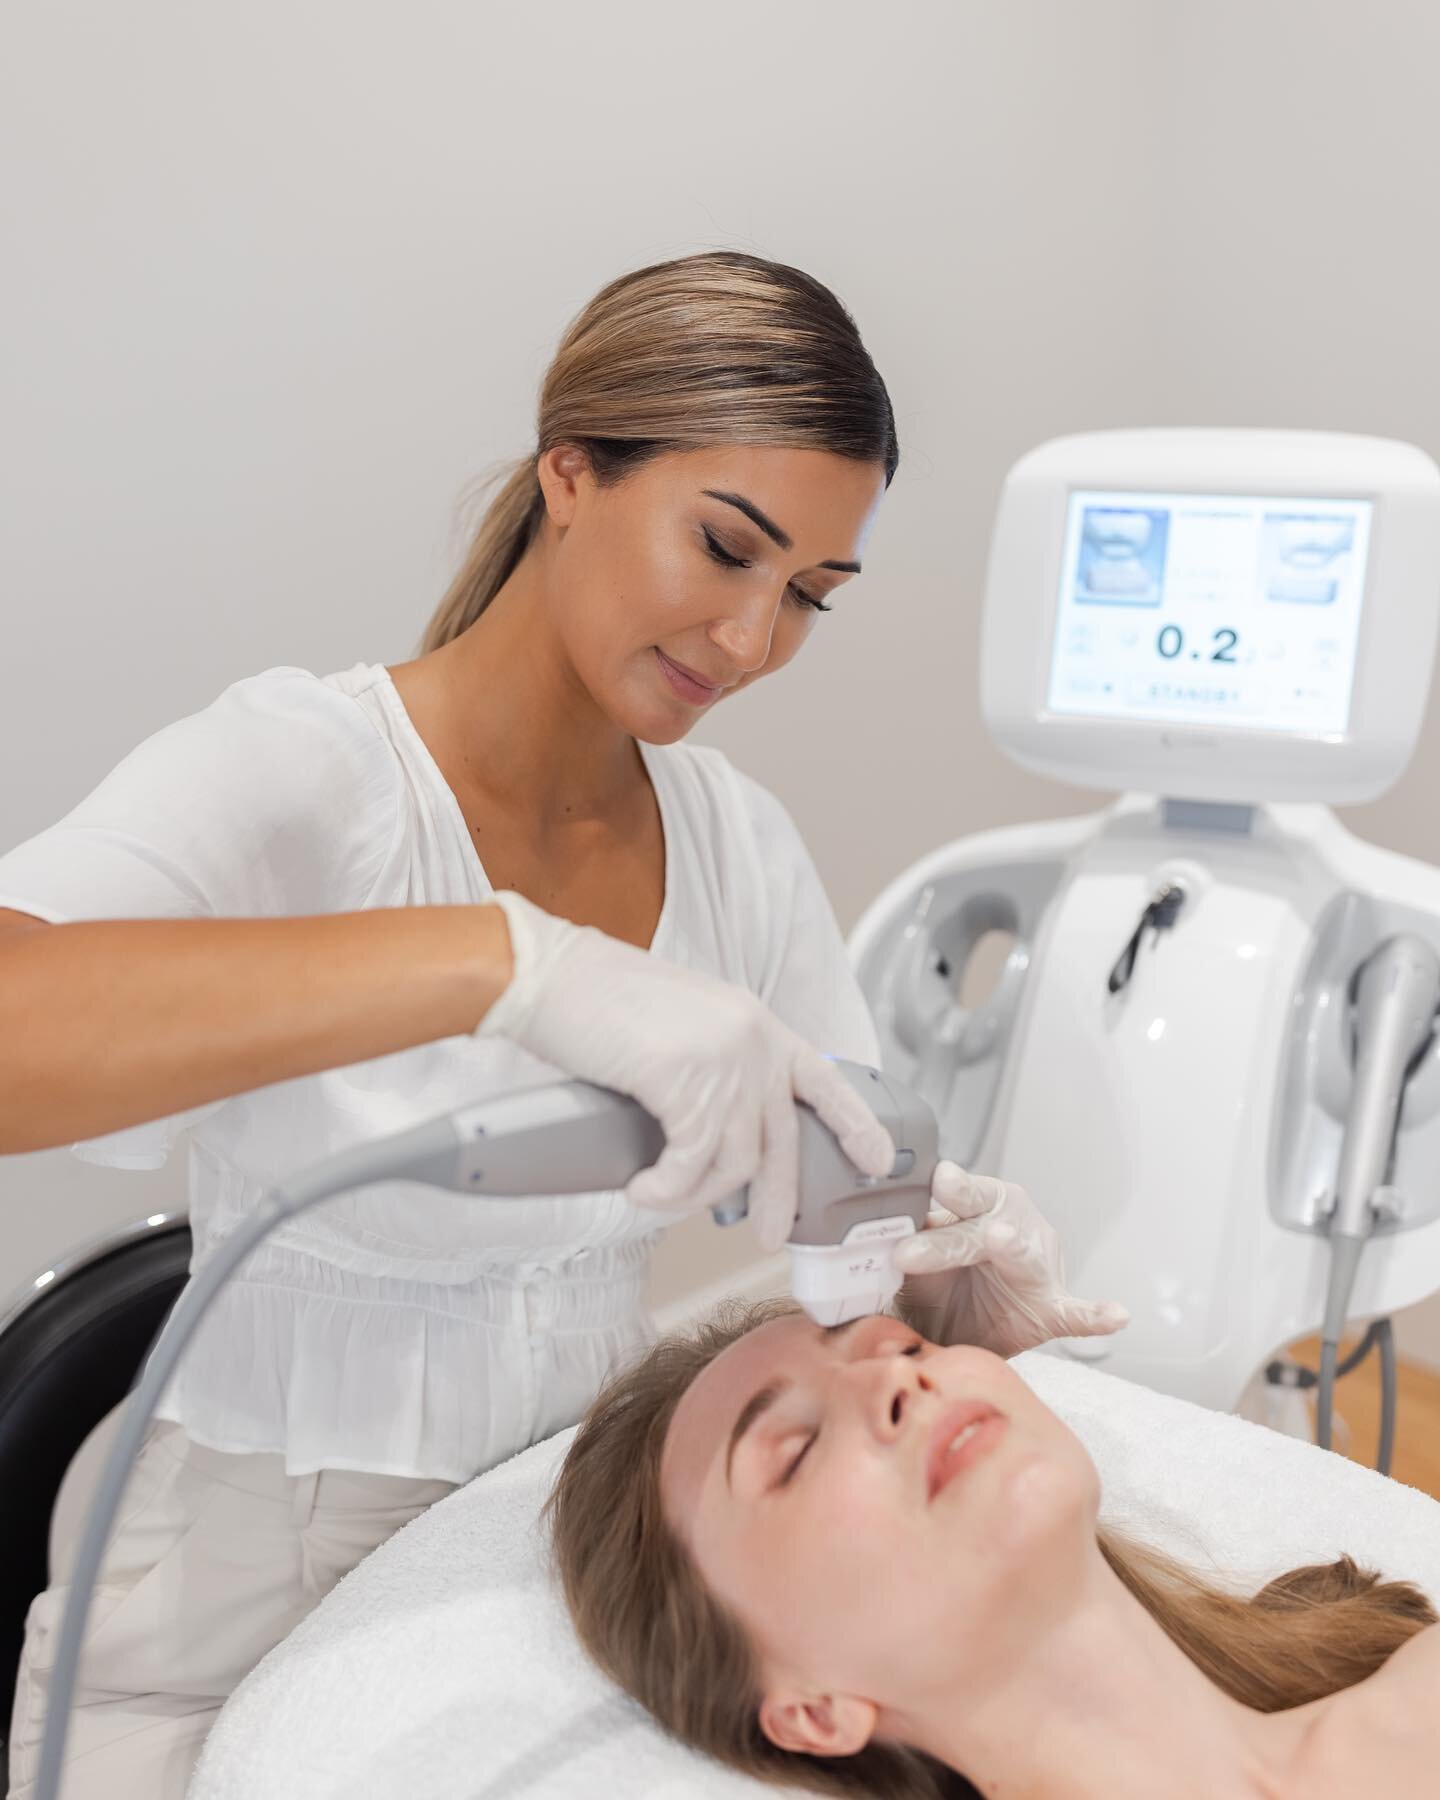 Lift, tighten, contour with Ultraformer 3, Hight Intensity Ultrasound Device. Using different cartridges we can target different layers in the skin for the ultimate results. ✨ 

Ultrasound energy is an acoustic energy, that without damaging the skin 